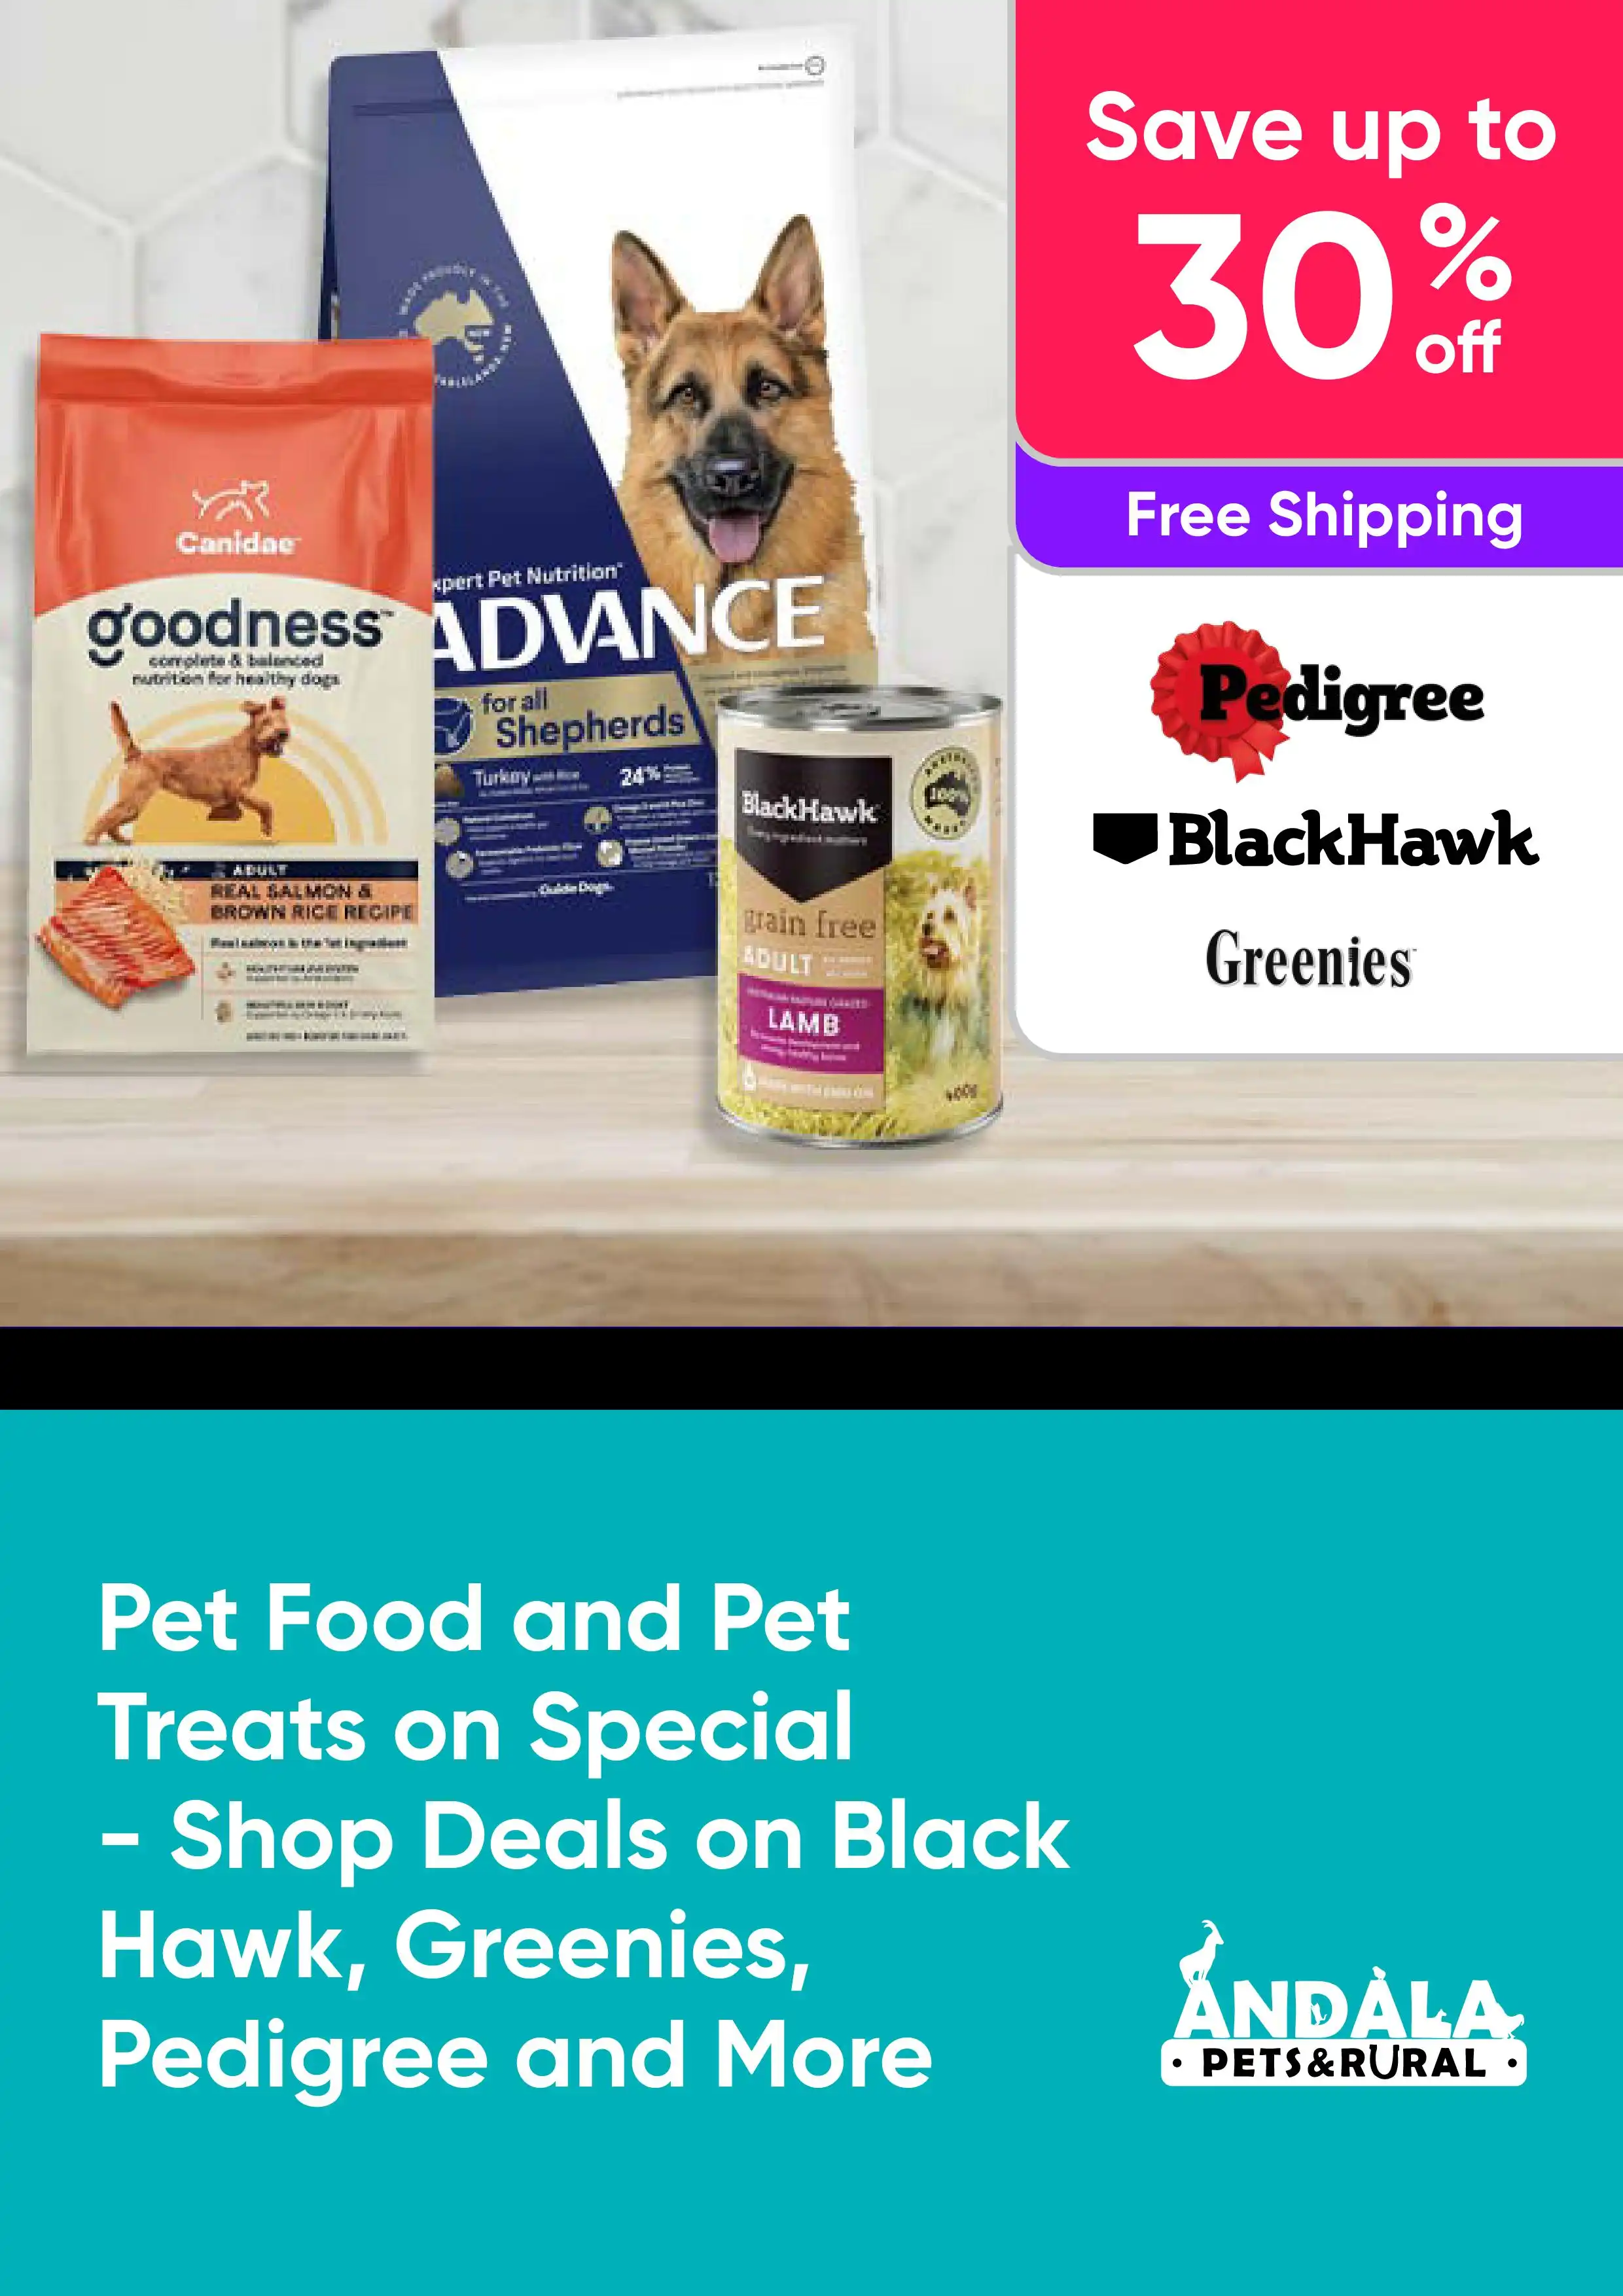 Pet Food and Pet Treats on Special - Shop Deals Up to 30% Off